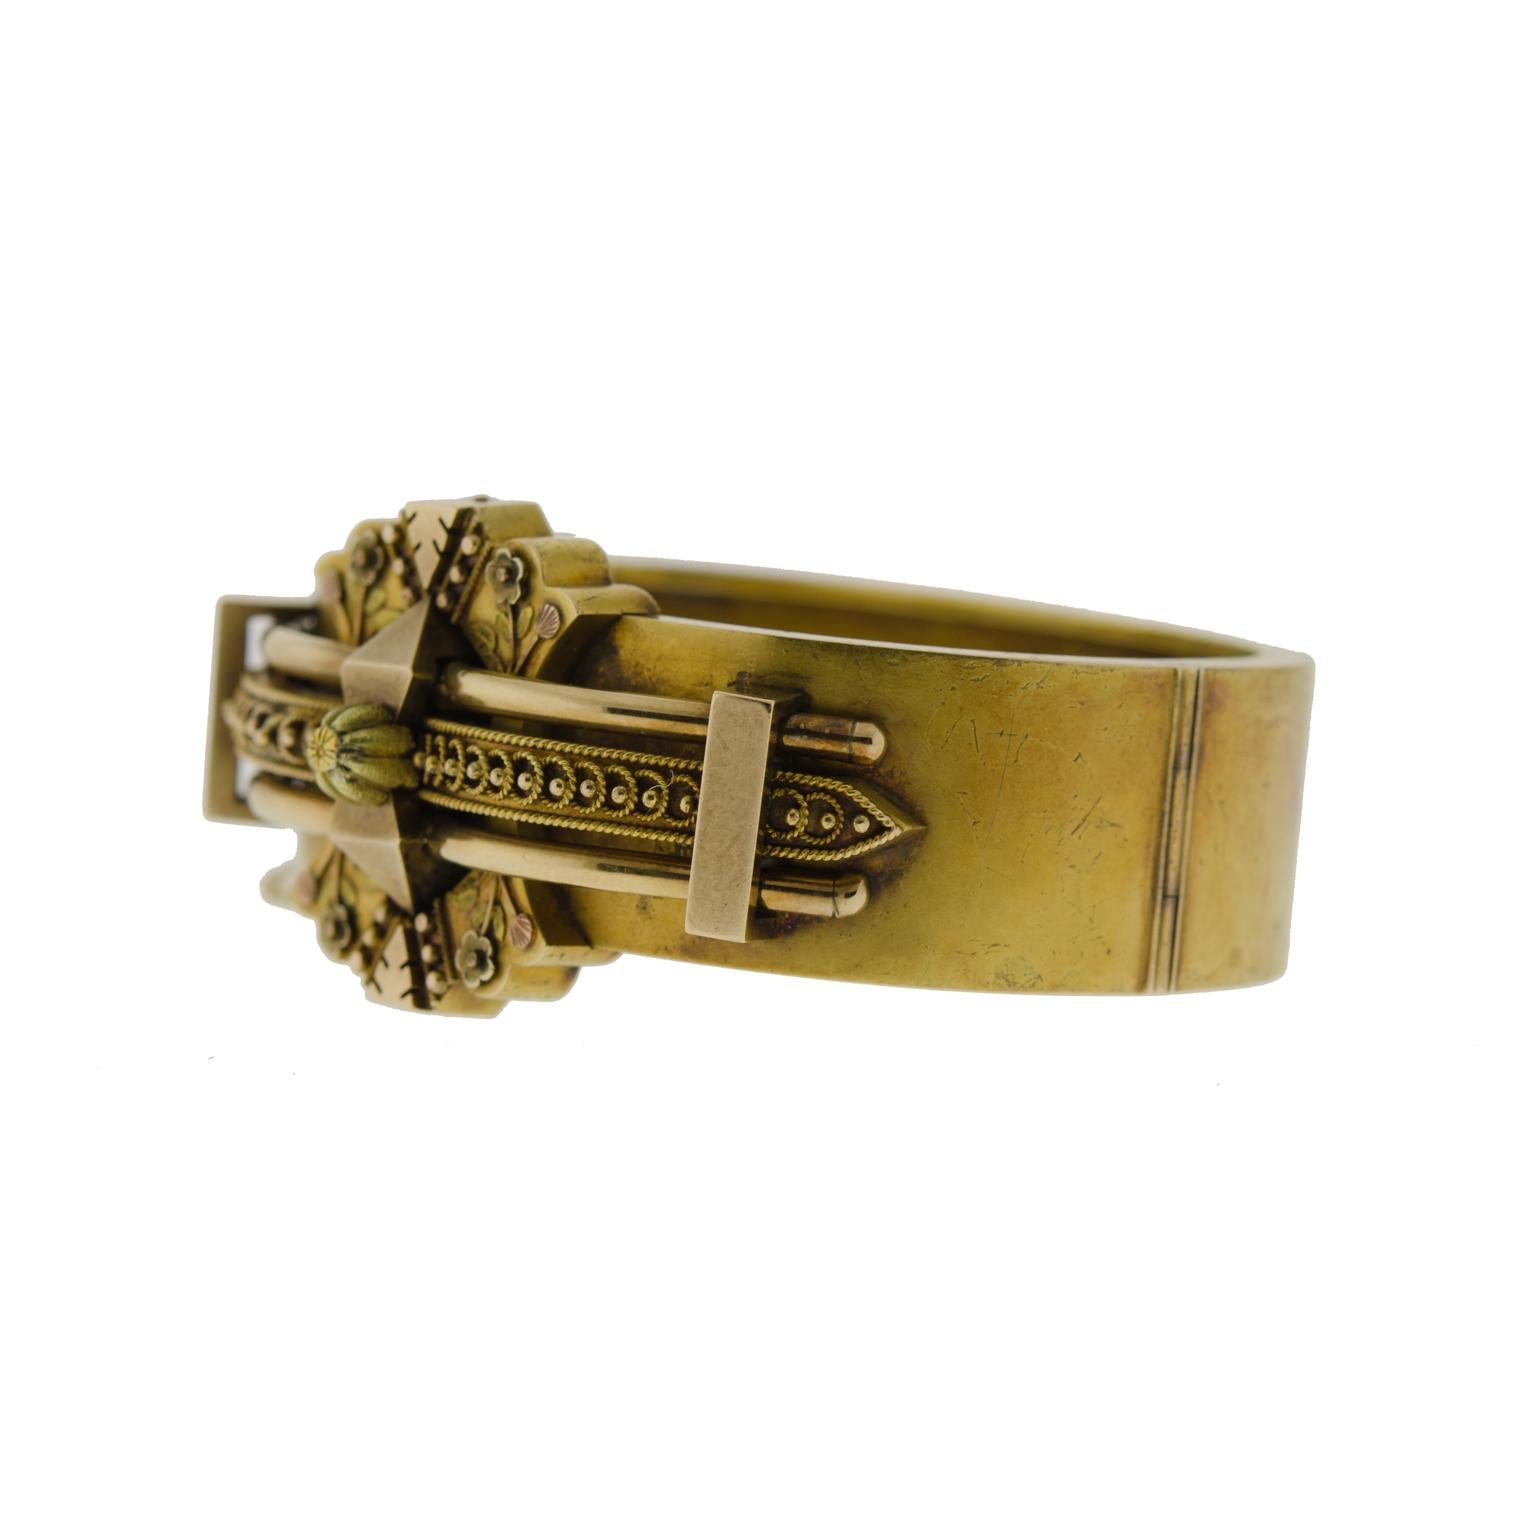 This striking multidimensional Victorian wide hinged bangle bracelet derives from the late nineteenth century. Handcrafted in 14 kt yellow gold and embellished with a classic Etruscan design. Applied goldwork covers the top of this bracelet,